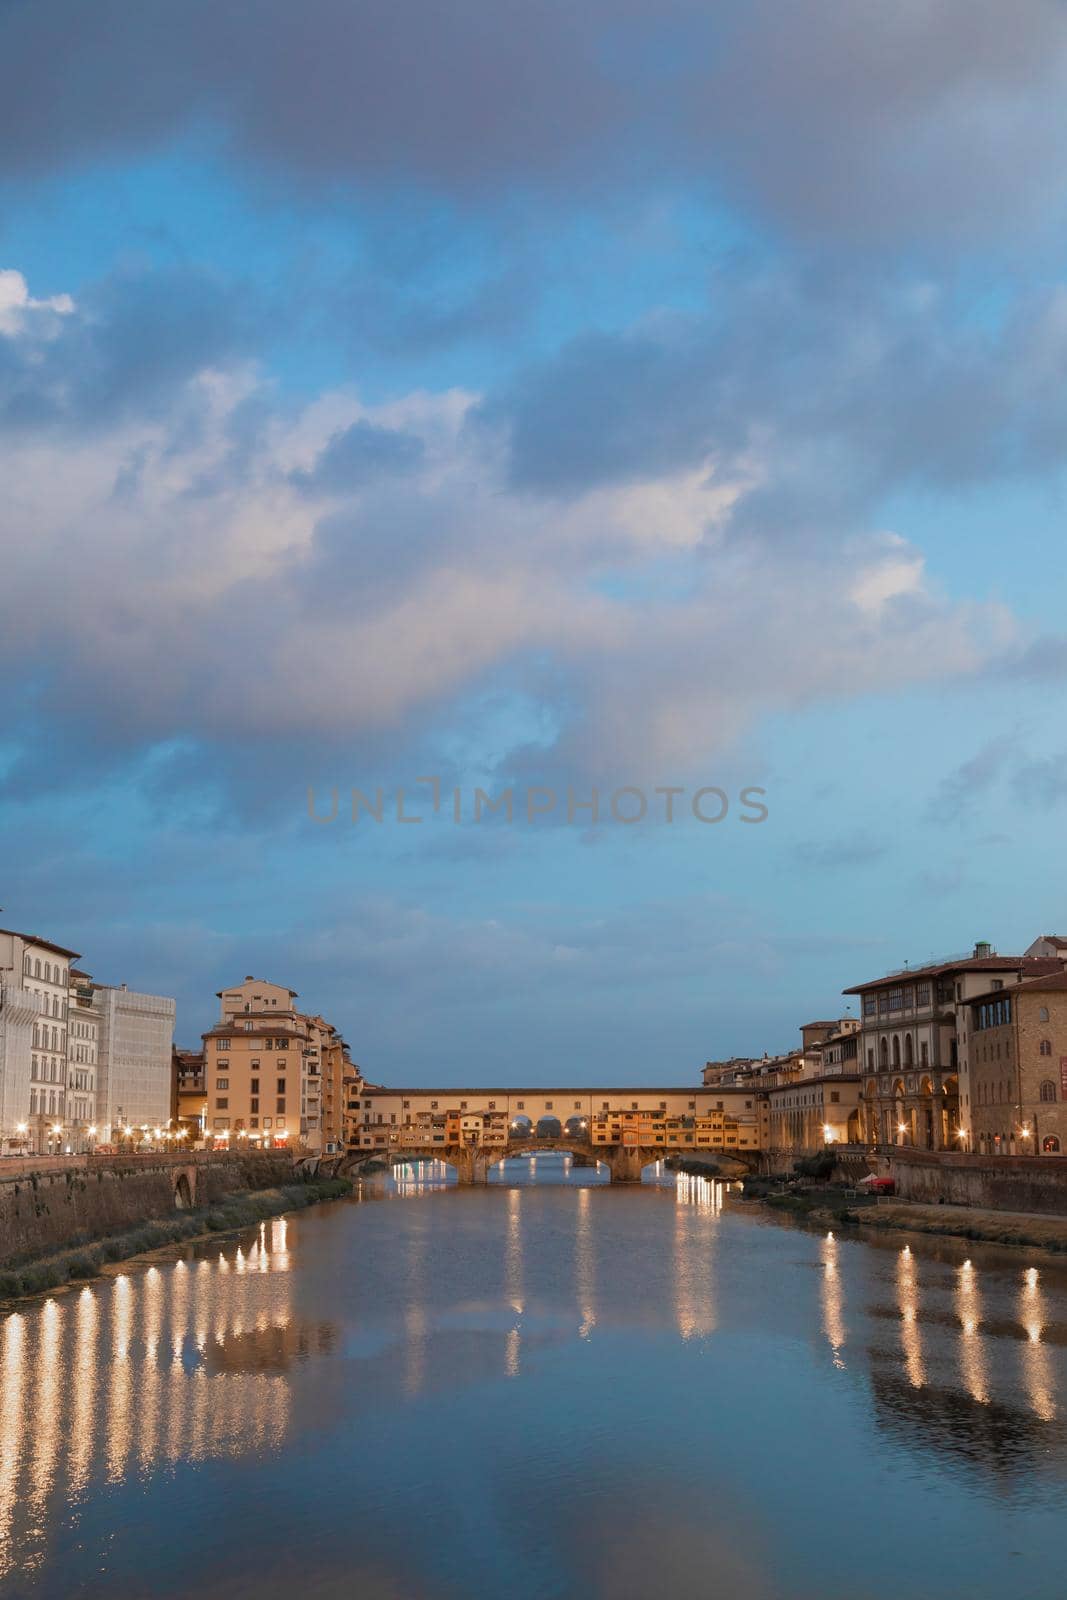 Sunset light on Ponte Vecchio - Old Bridge - in Florence, Italy.  by Perseomedusa